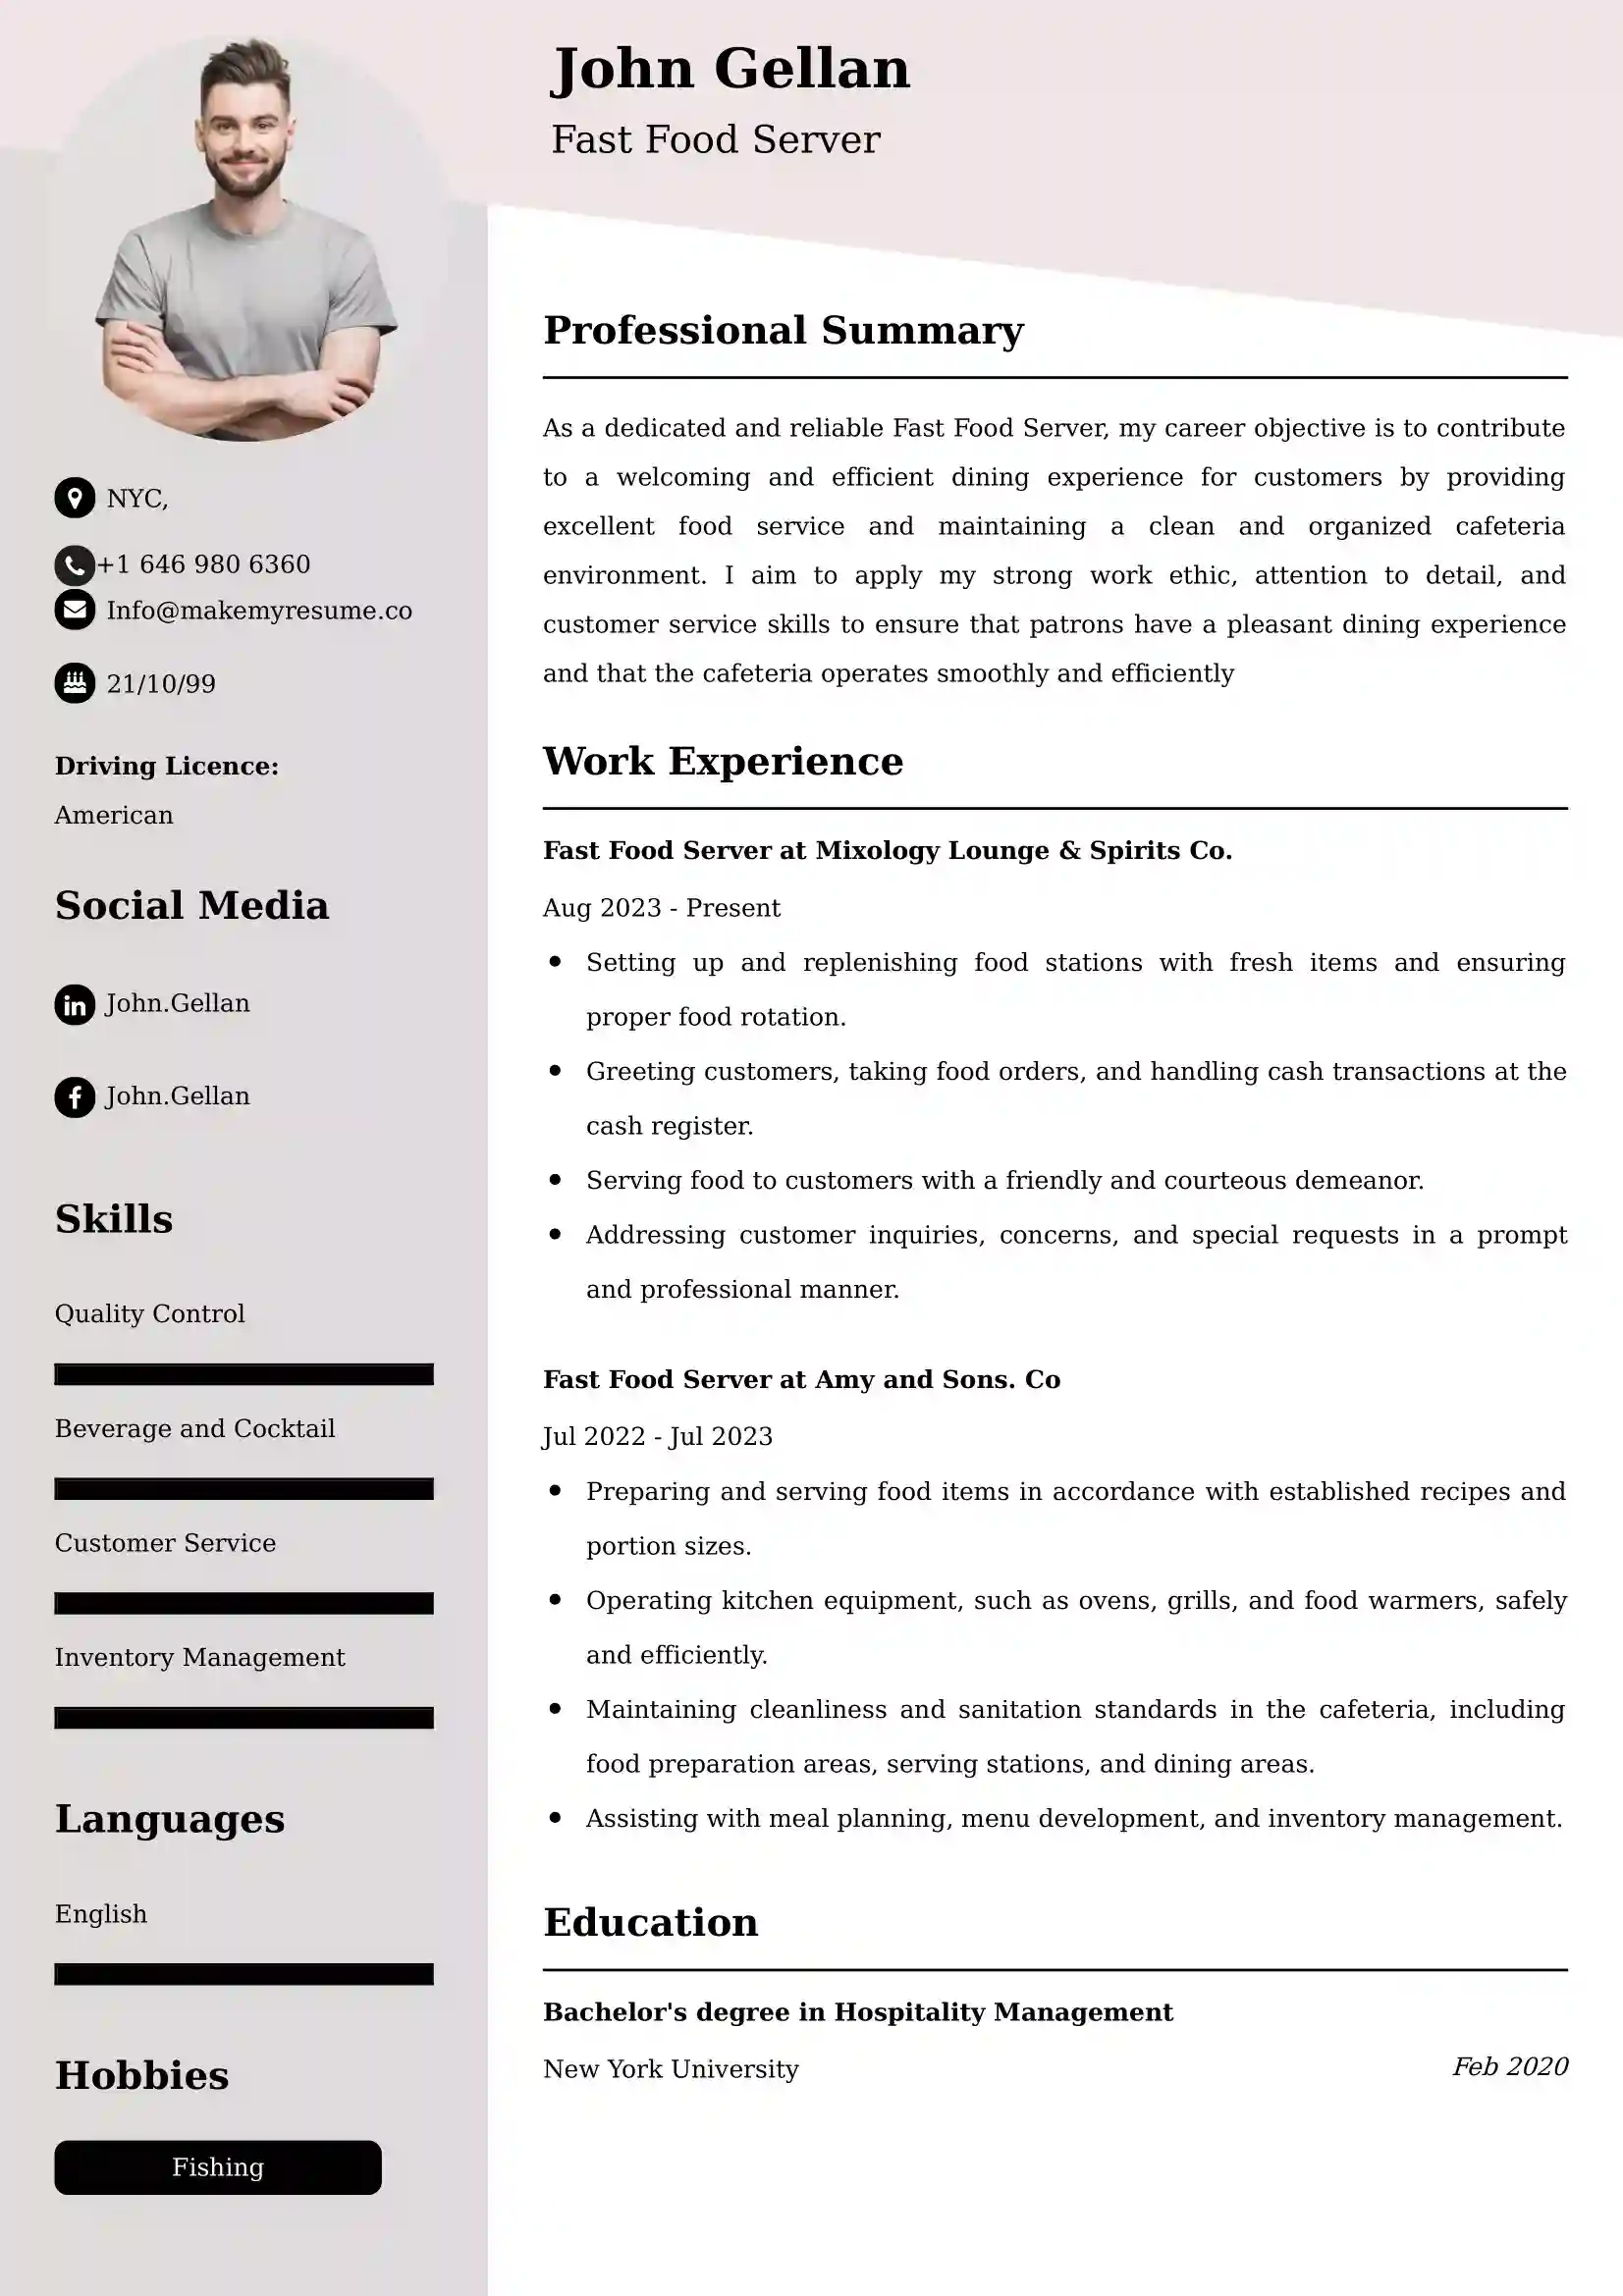 Fast Food Server Resume Examples - UK Format, Latest Template.